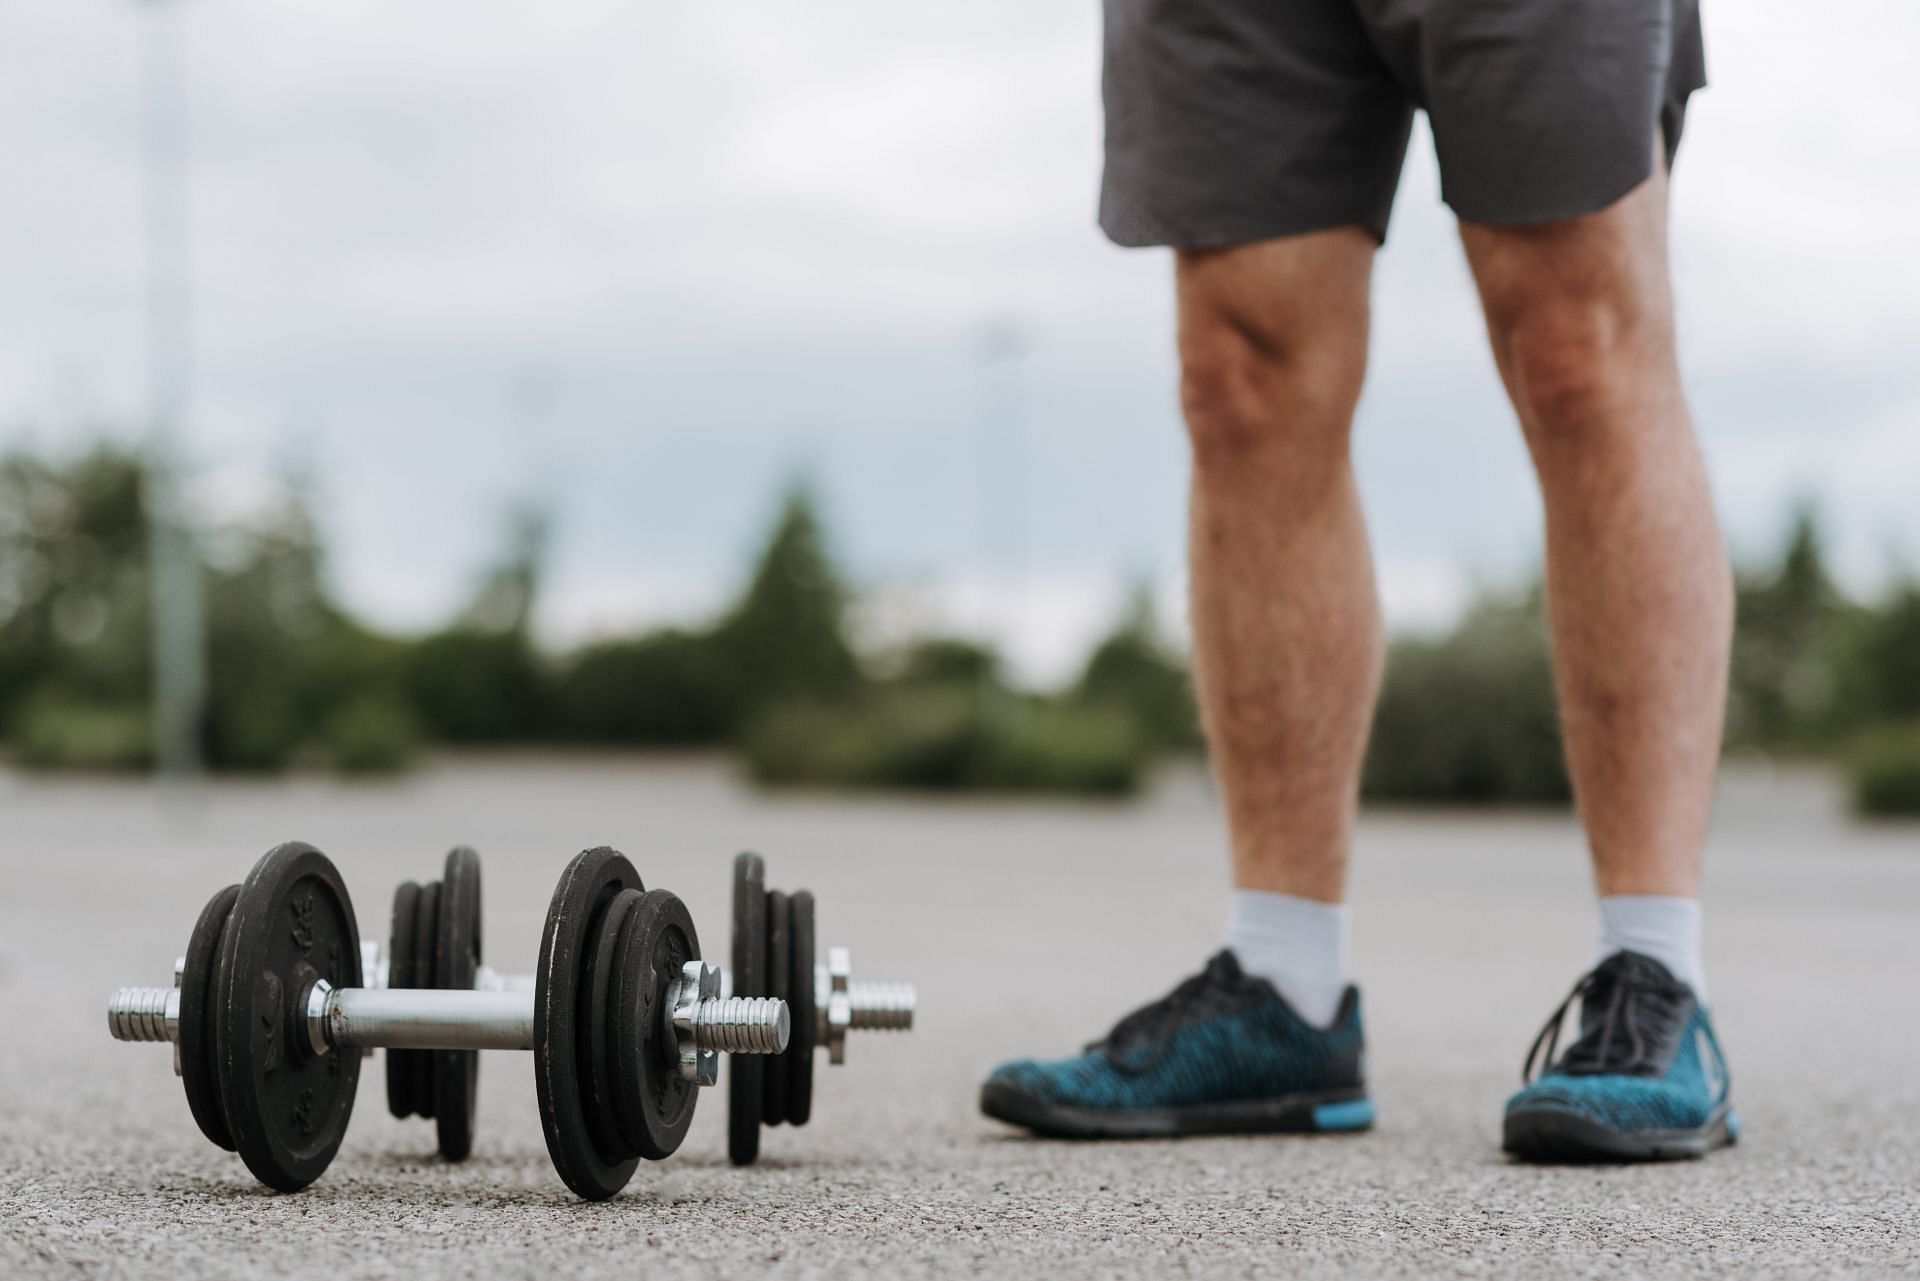 Exercise equipment for legs (Image sourced via Pexels / Photo by Anete)